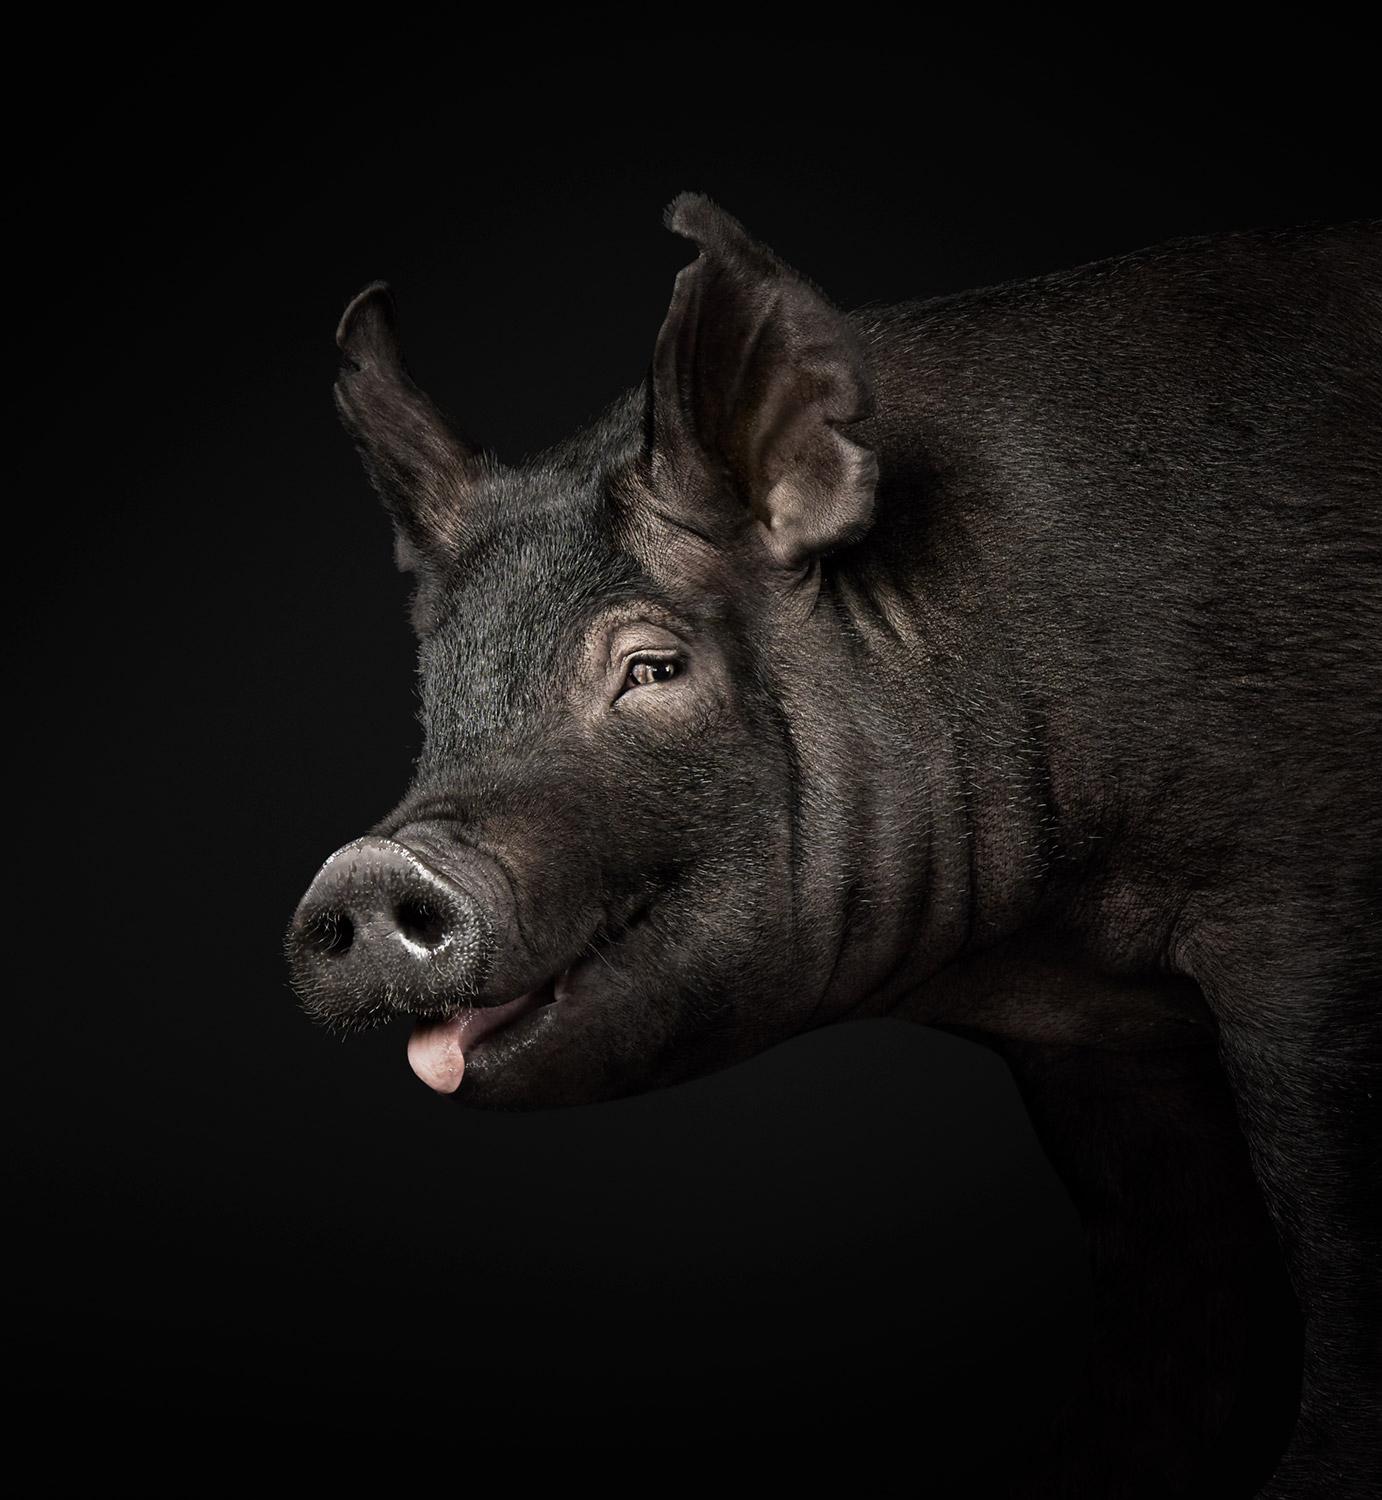 "Ol’ Jethro, what a character. Having been a show pig his whole life, Jethro is kind of a big deal in several parts of the world, but he sure was stubborn. We tried over and over to get a straight-on shot of his perfect pig features, but Jethro was